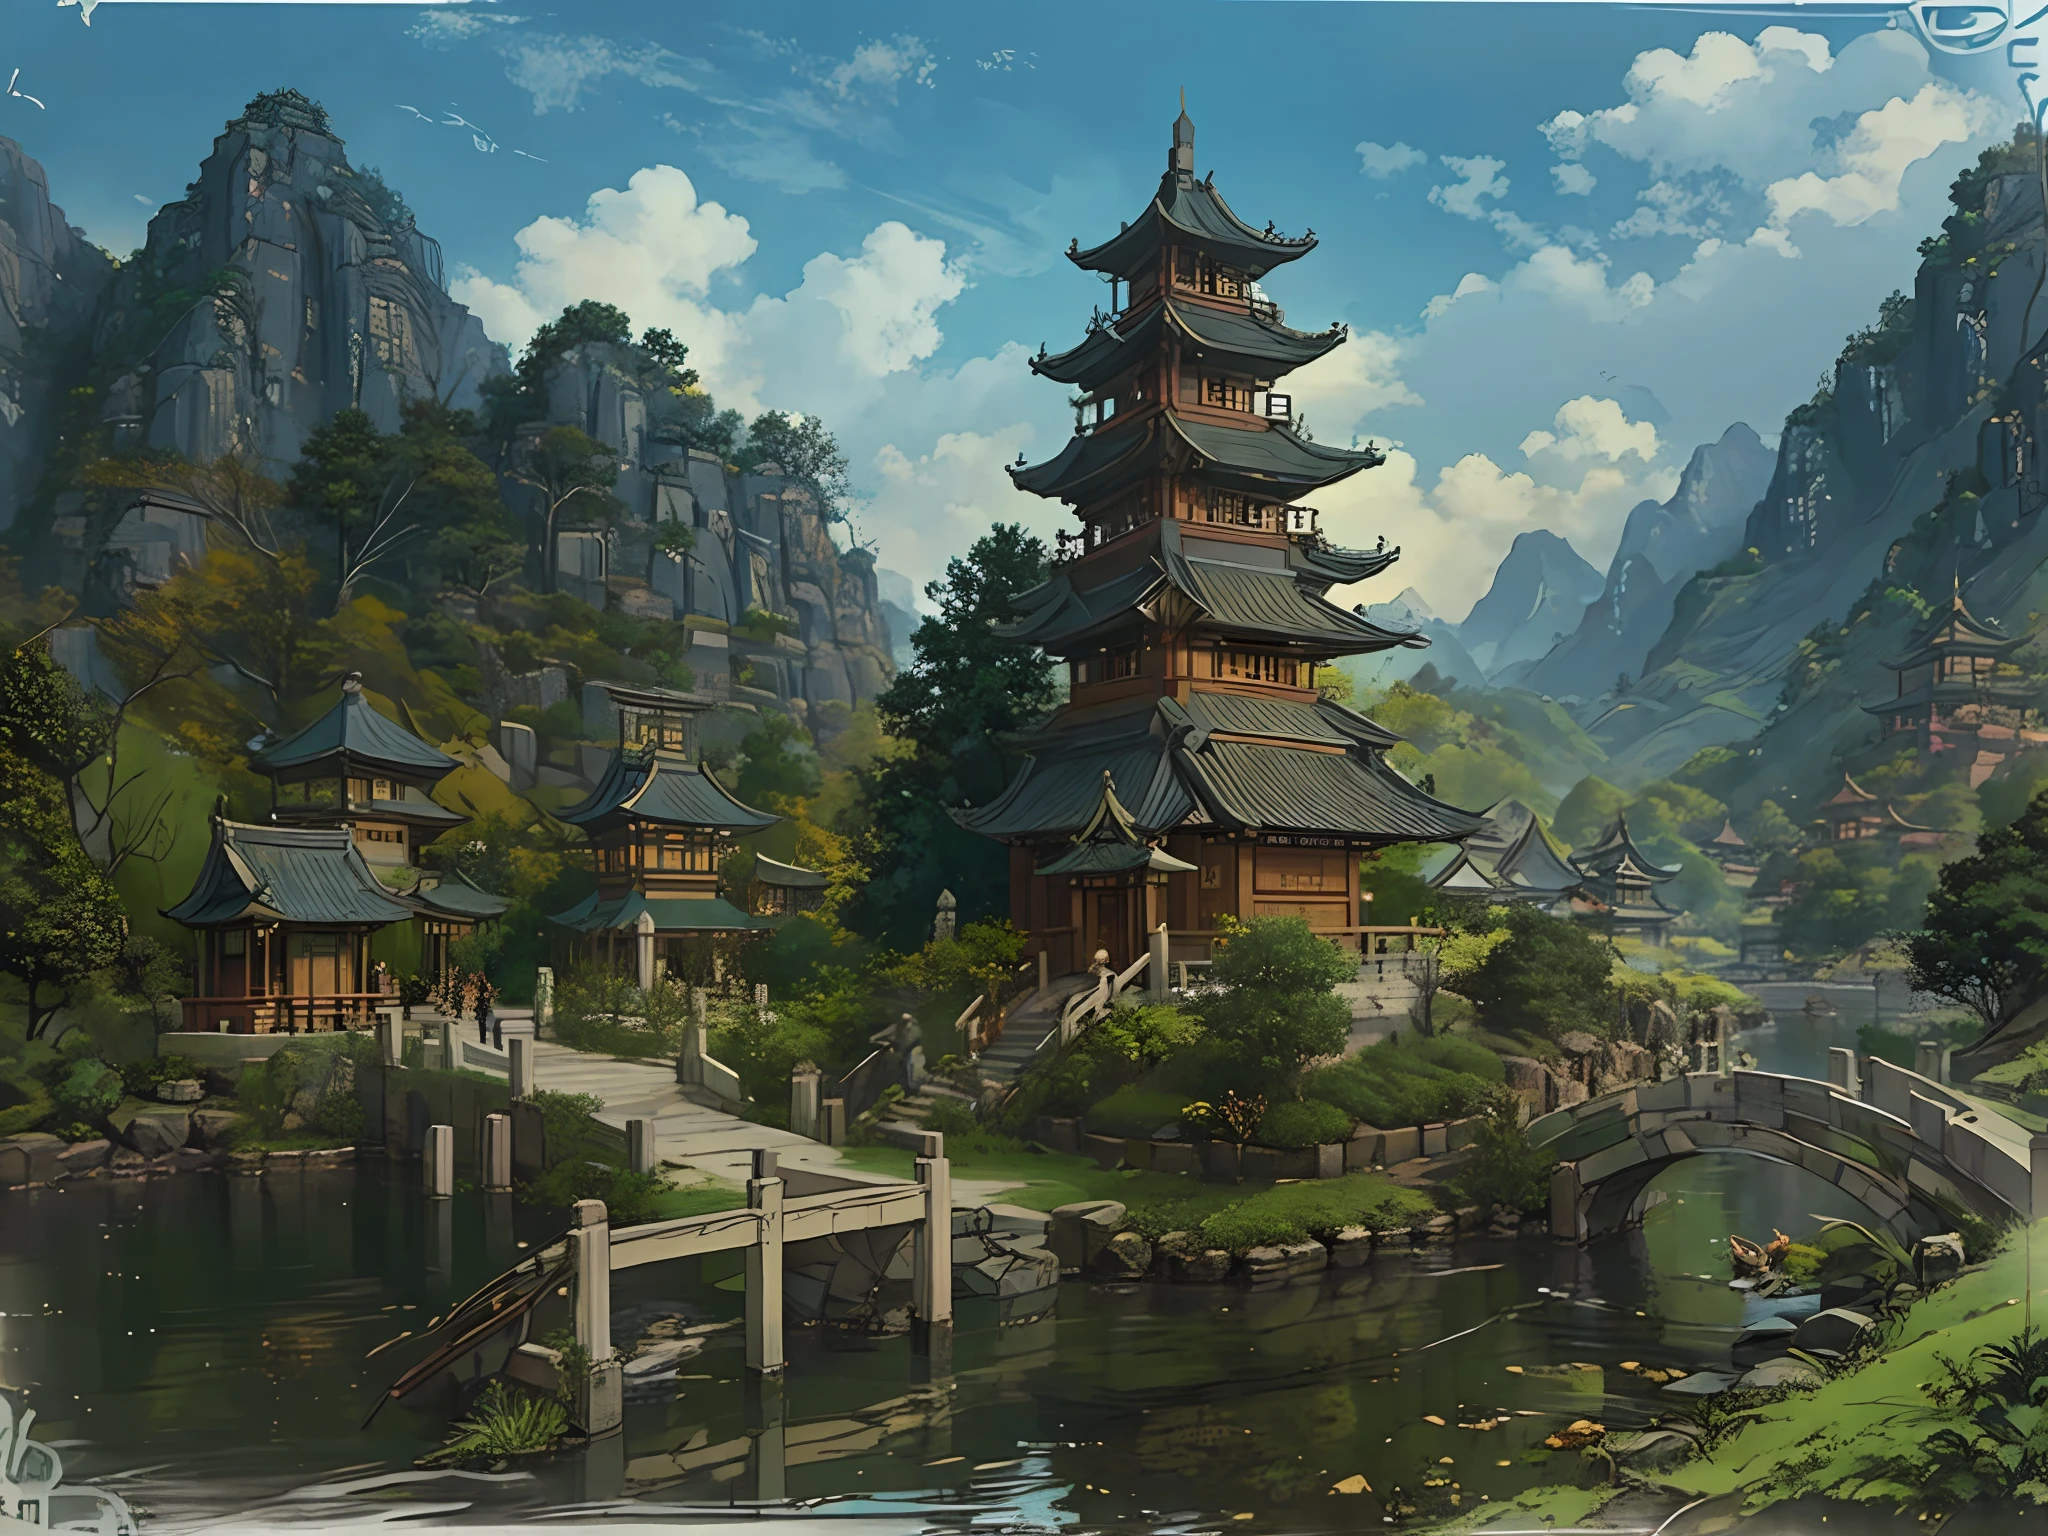 Chinese village scenery with bridge and pagoda, landscape artwork, G Ryurian art style, temple background, landscape game concept art, detailed scenery - width 672, beautiful artwork illustration, zen temple background,